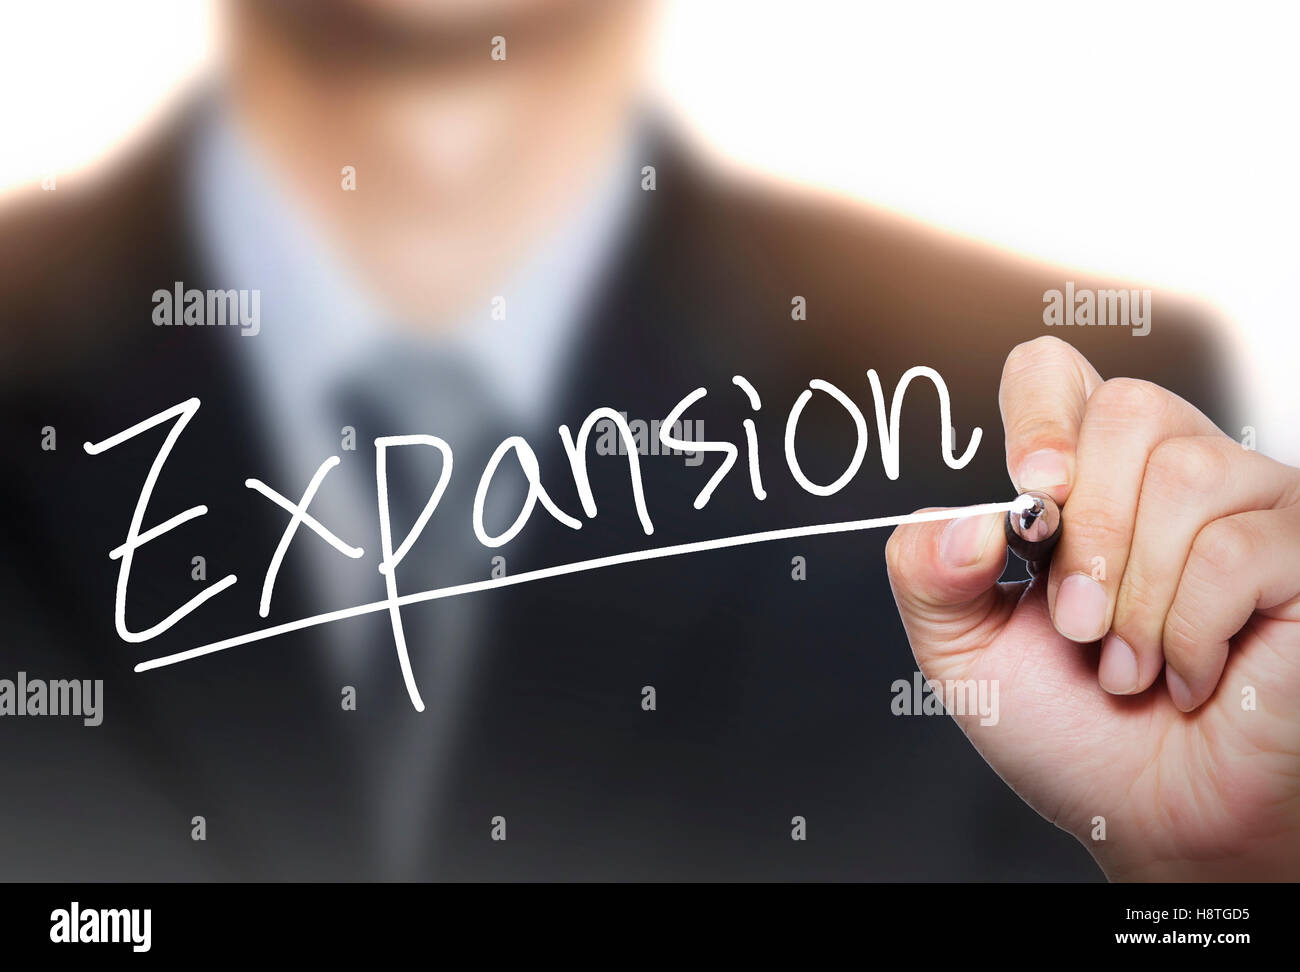 expansion written by hand, hand writing on transparent board, photo Stock Photo